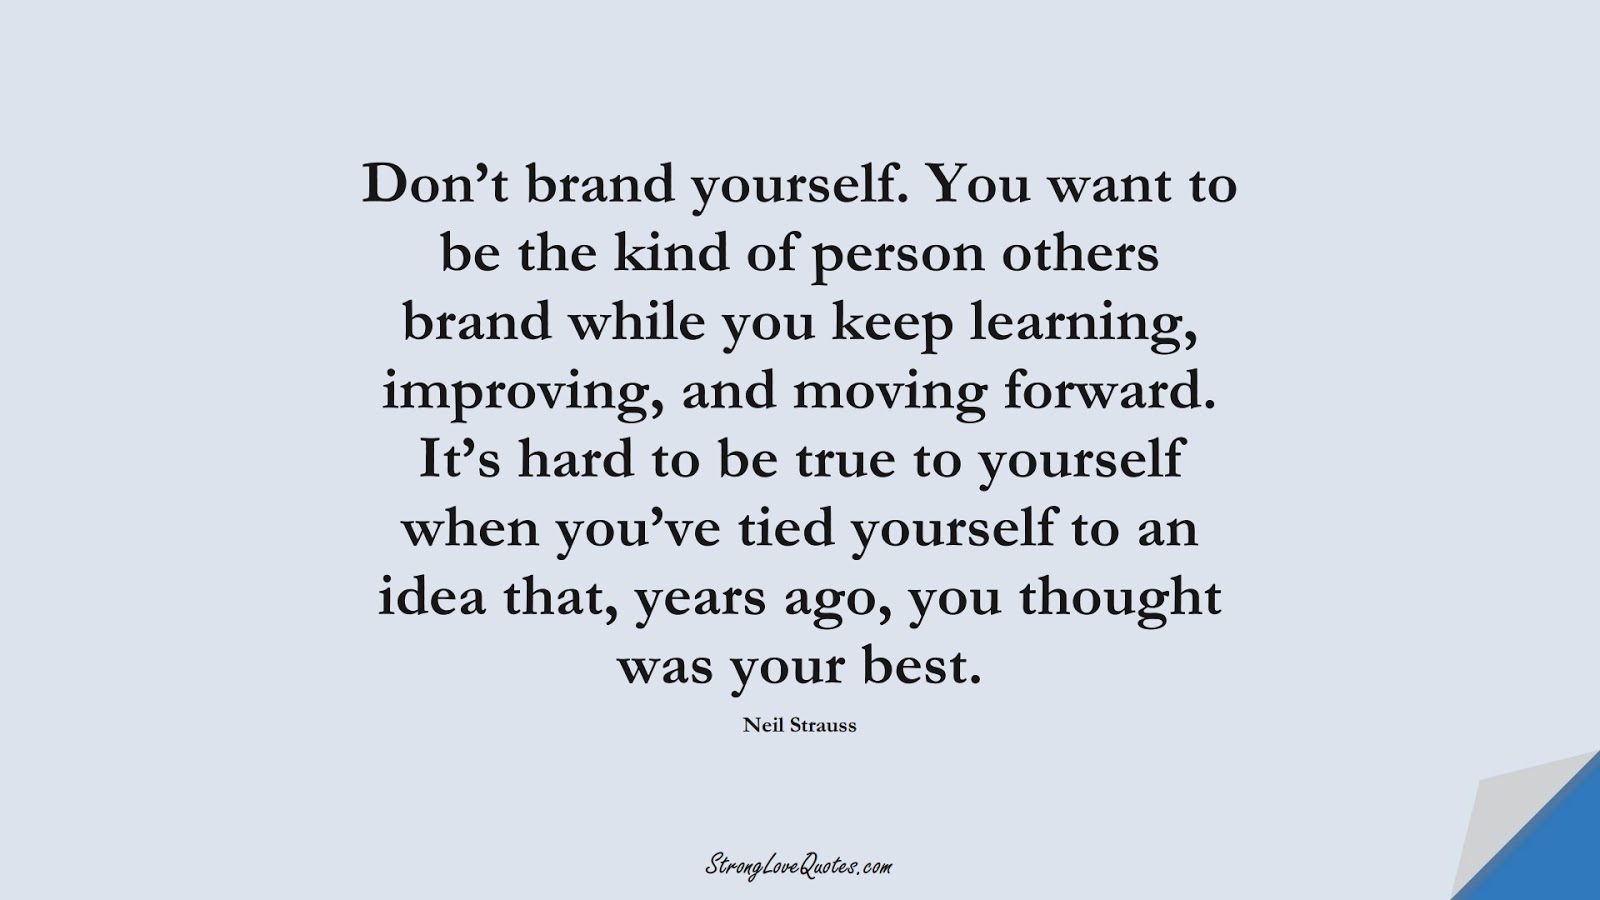 Don’t brand yourself. You want to be the kind of person others brand while you keep learning, improving, and moving forward. It’s hard to be true to yourself when you’ve tied yourself to an idea that, years ago, you thought was your best. (Neil Strauss);  #LearningQuotes